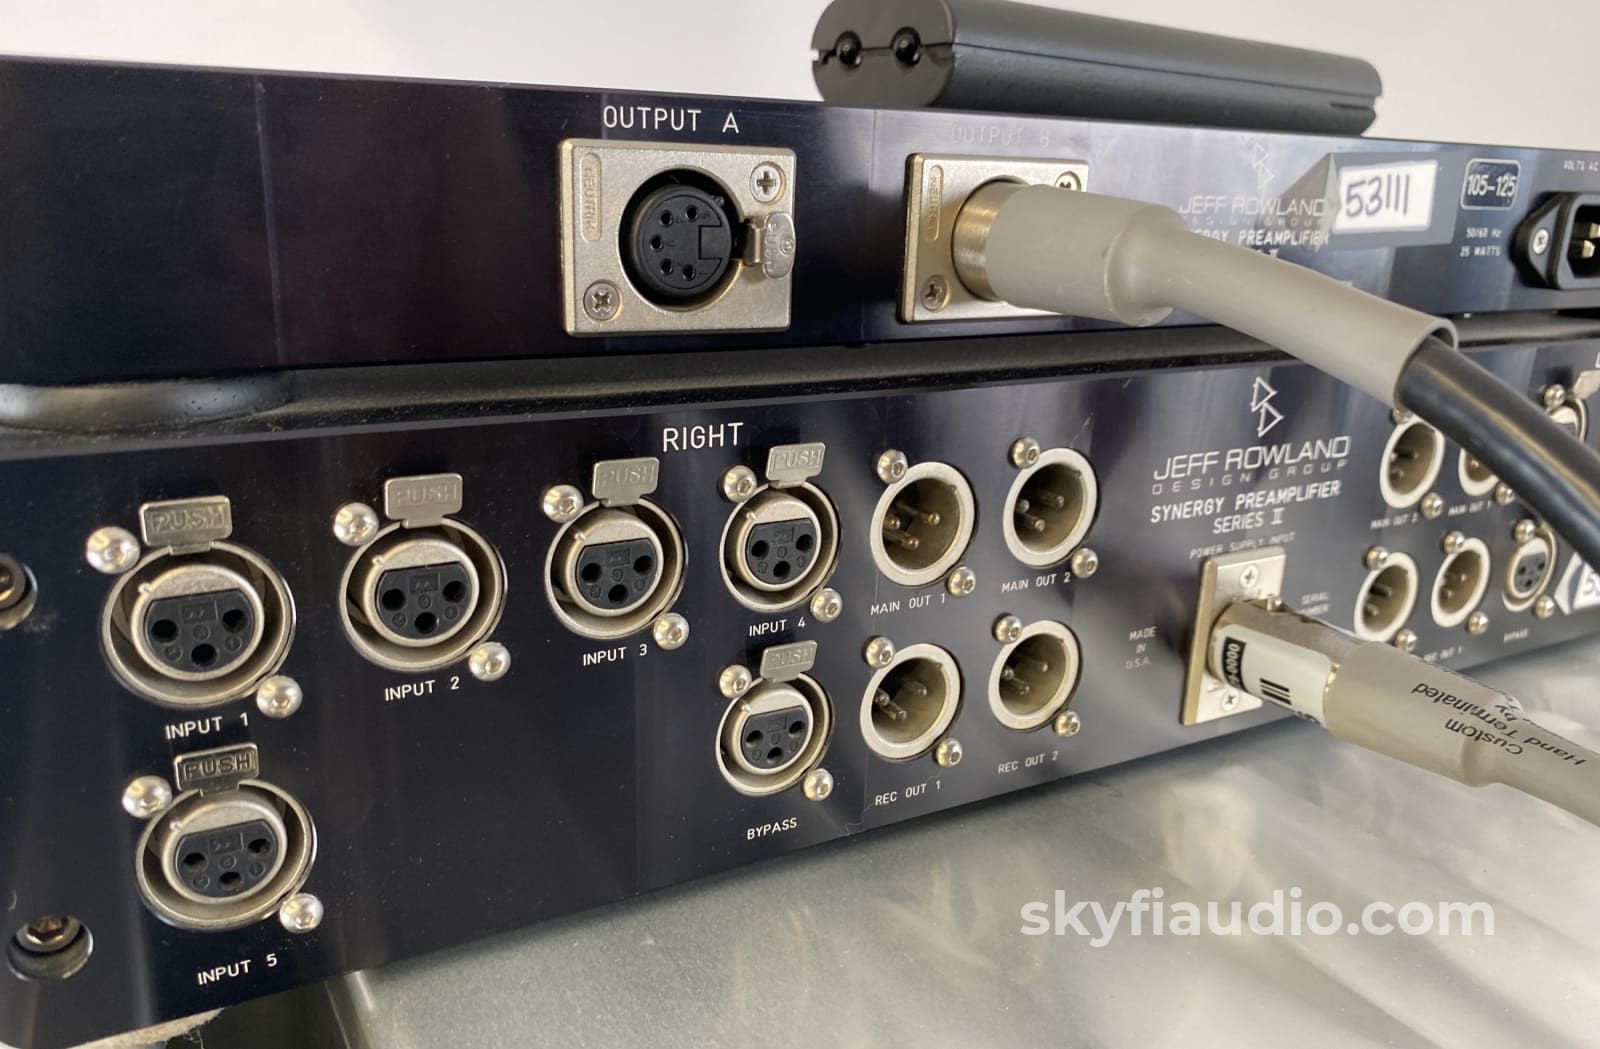 Jeff Rowland Synergy Mkii Two Piece Preamplifier With Remote